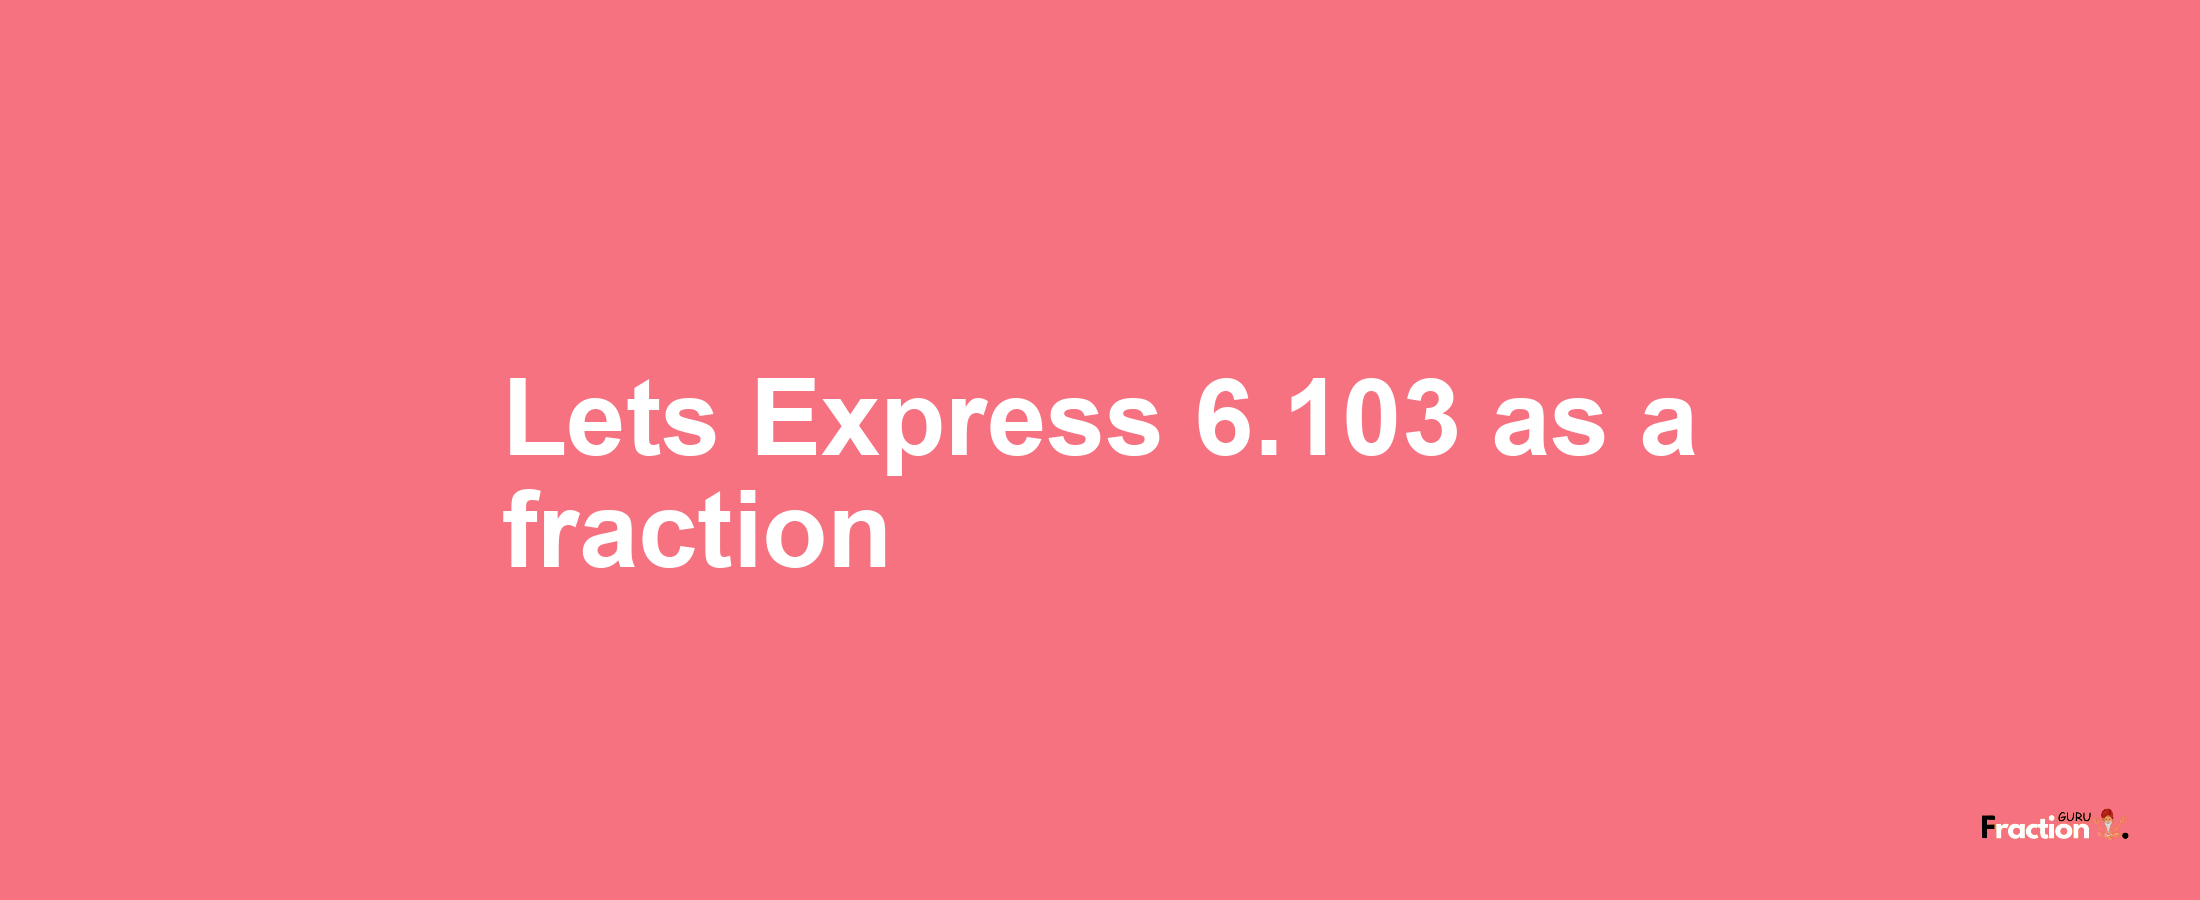 Lets Express 6.103 as afraction